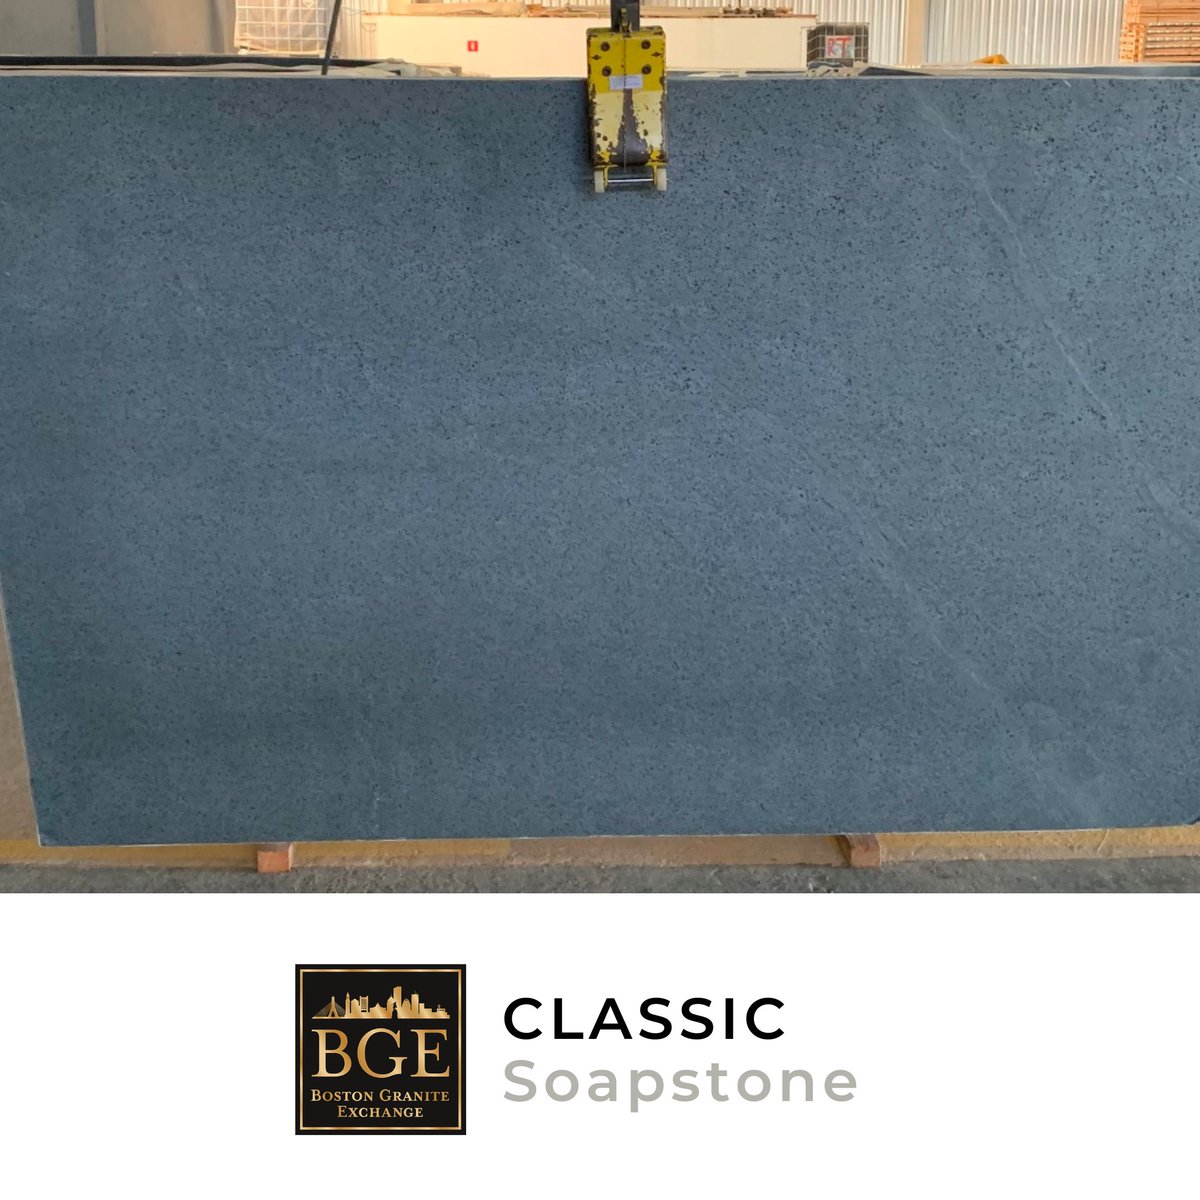 Looking for #farmhousekitchen inspiration? Soapstone is a classic stone with an antique, historic look. Suitable for kitchen countertops, soapstone comes in a variety of natural, rich colors, is easy to maintain, and will never go out of style.

#Soapstone #KitchenDesign